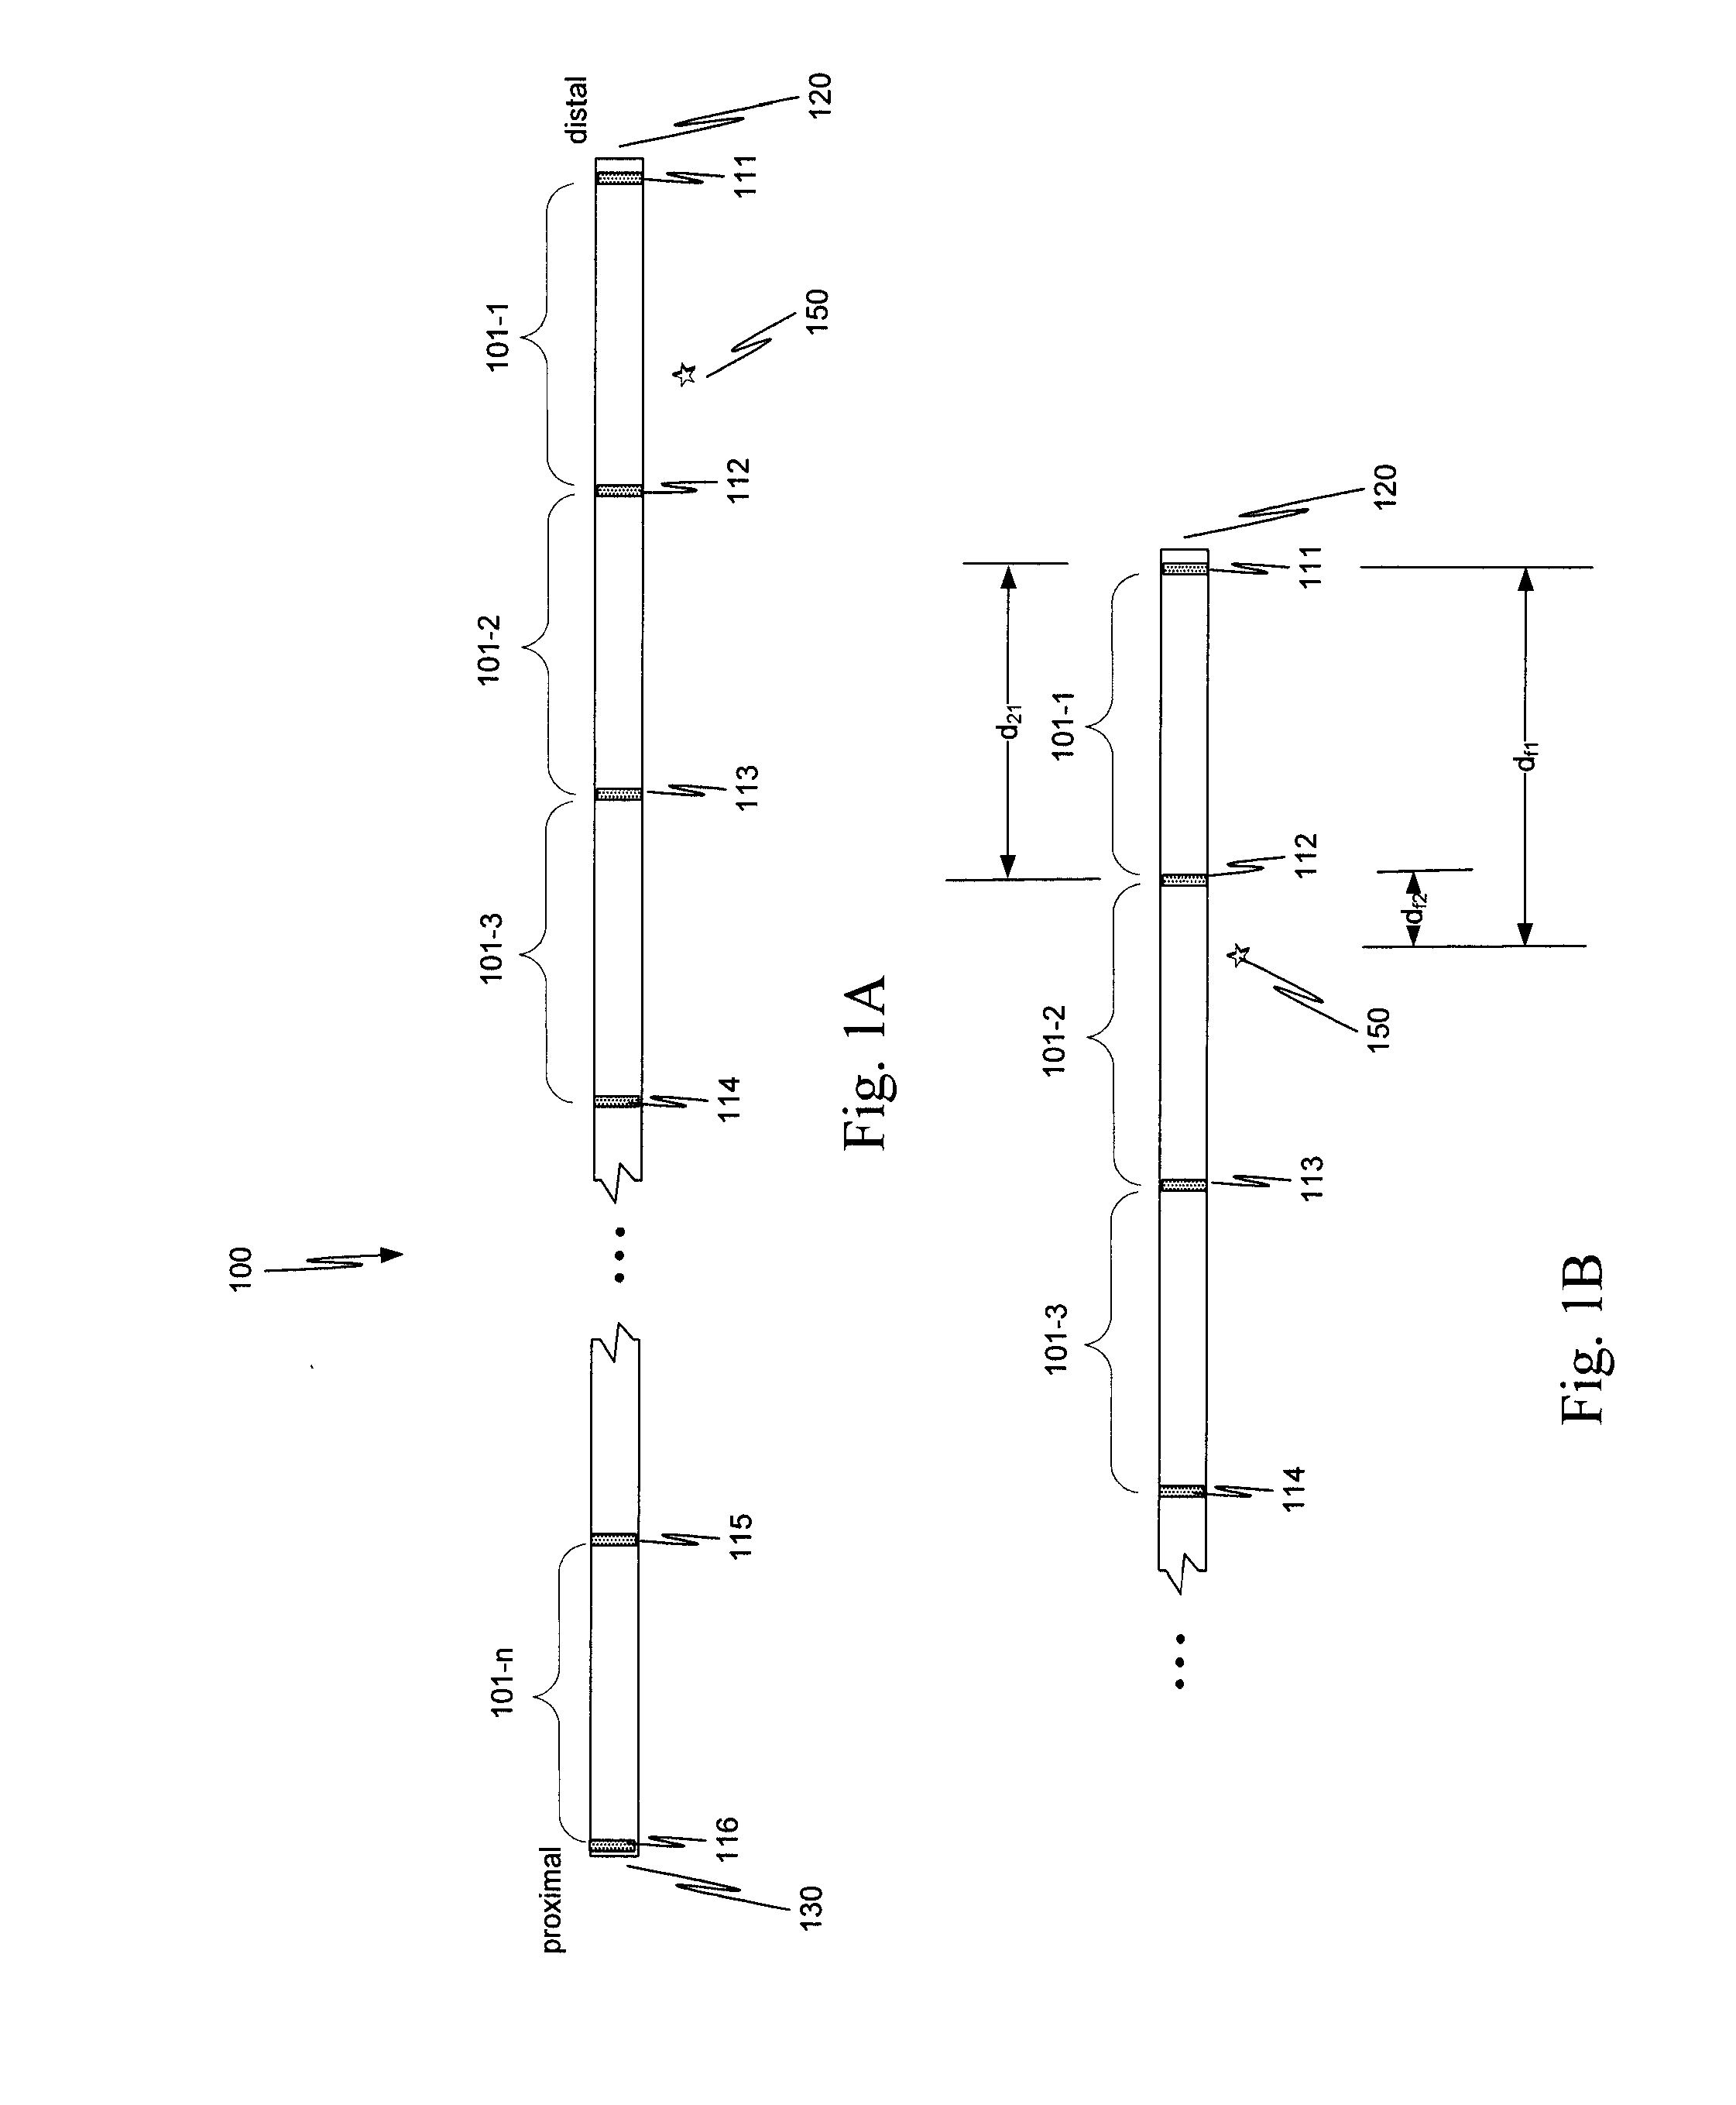 Method and system for measuring inserted length of a medical device using internal referenced sensors